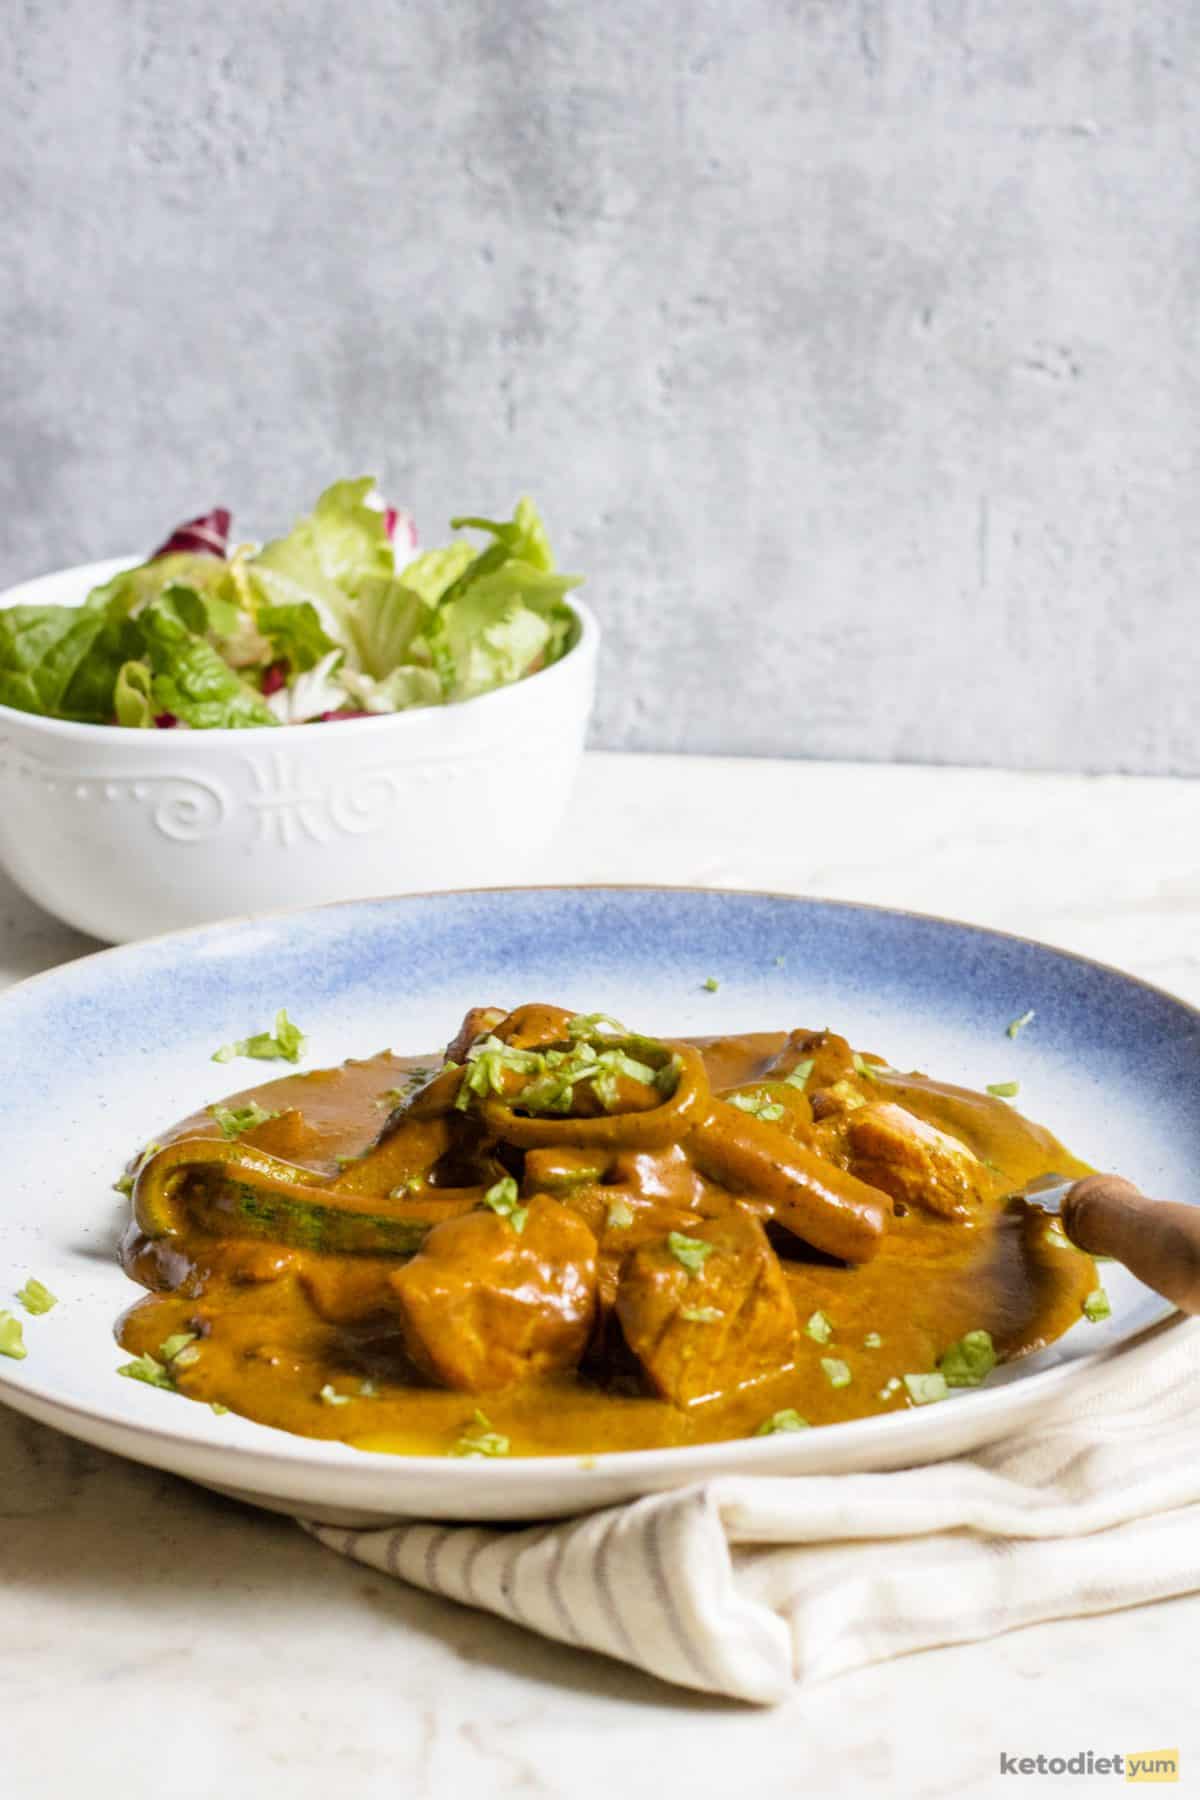 A yummy low carb keto salmon coconut curry with side salad